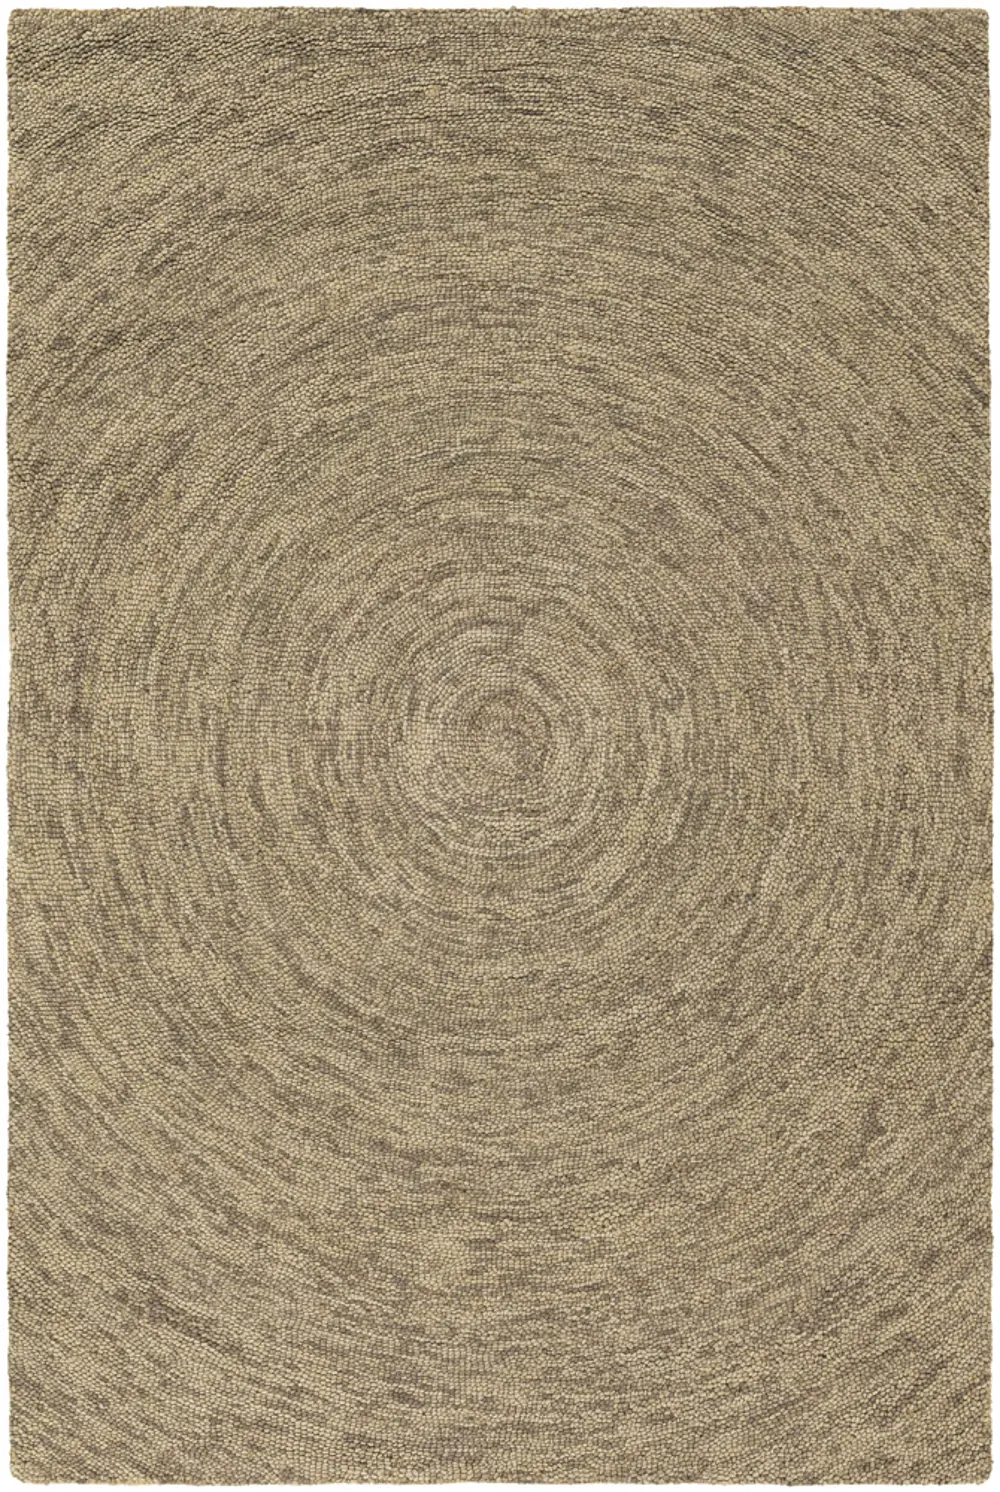 5 x 8 Medium Contemporary Beige and Taupe Area Rug - Galaxy-1